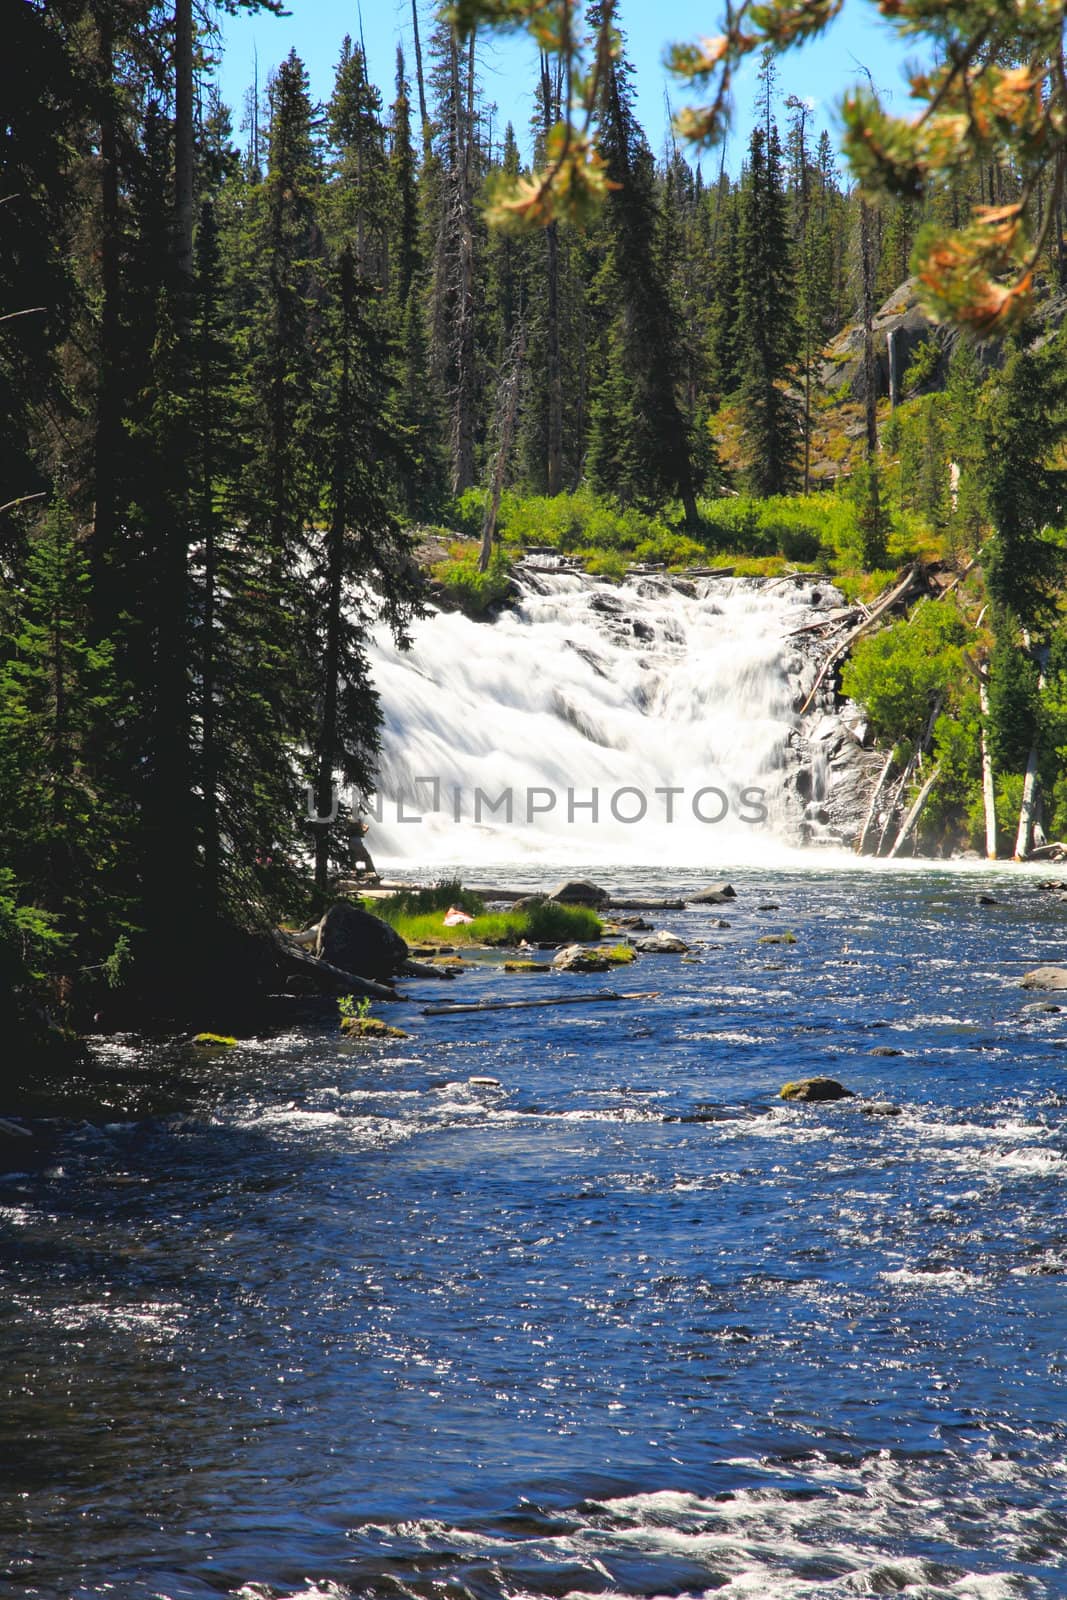 The Lewis Falls in the Yellowstone National Park